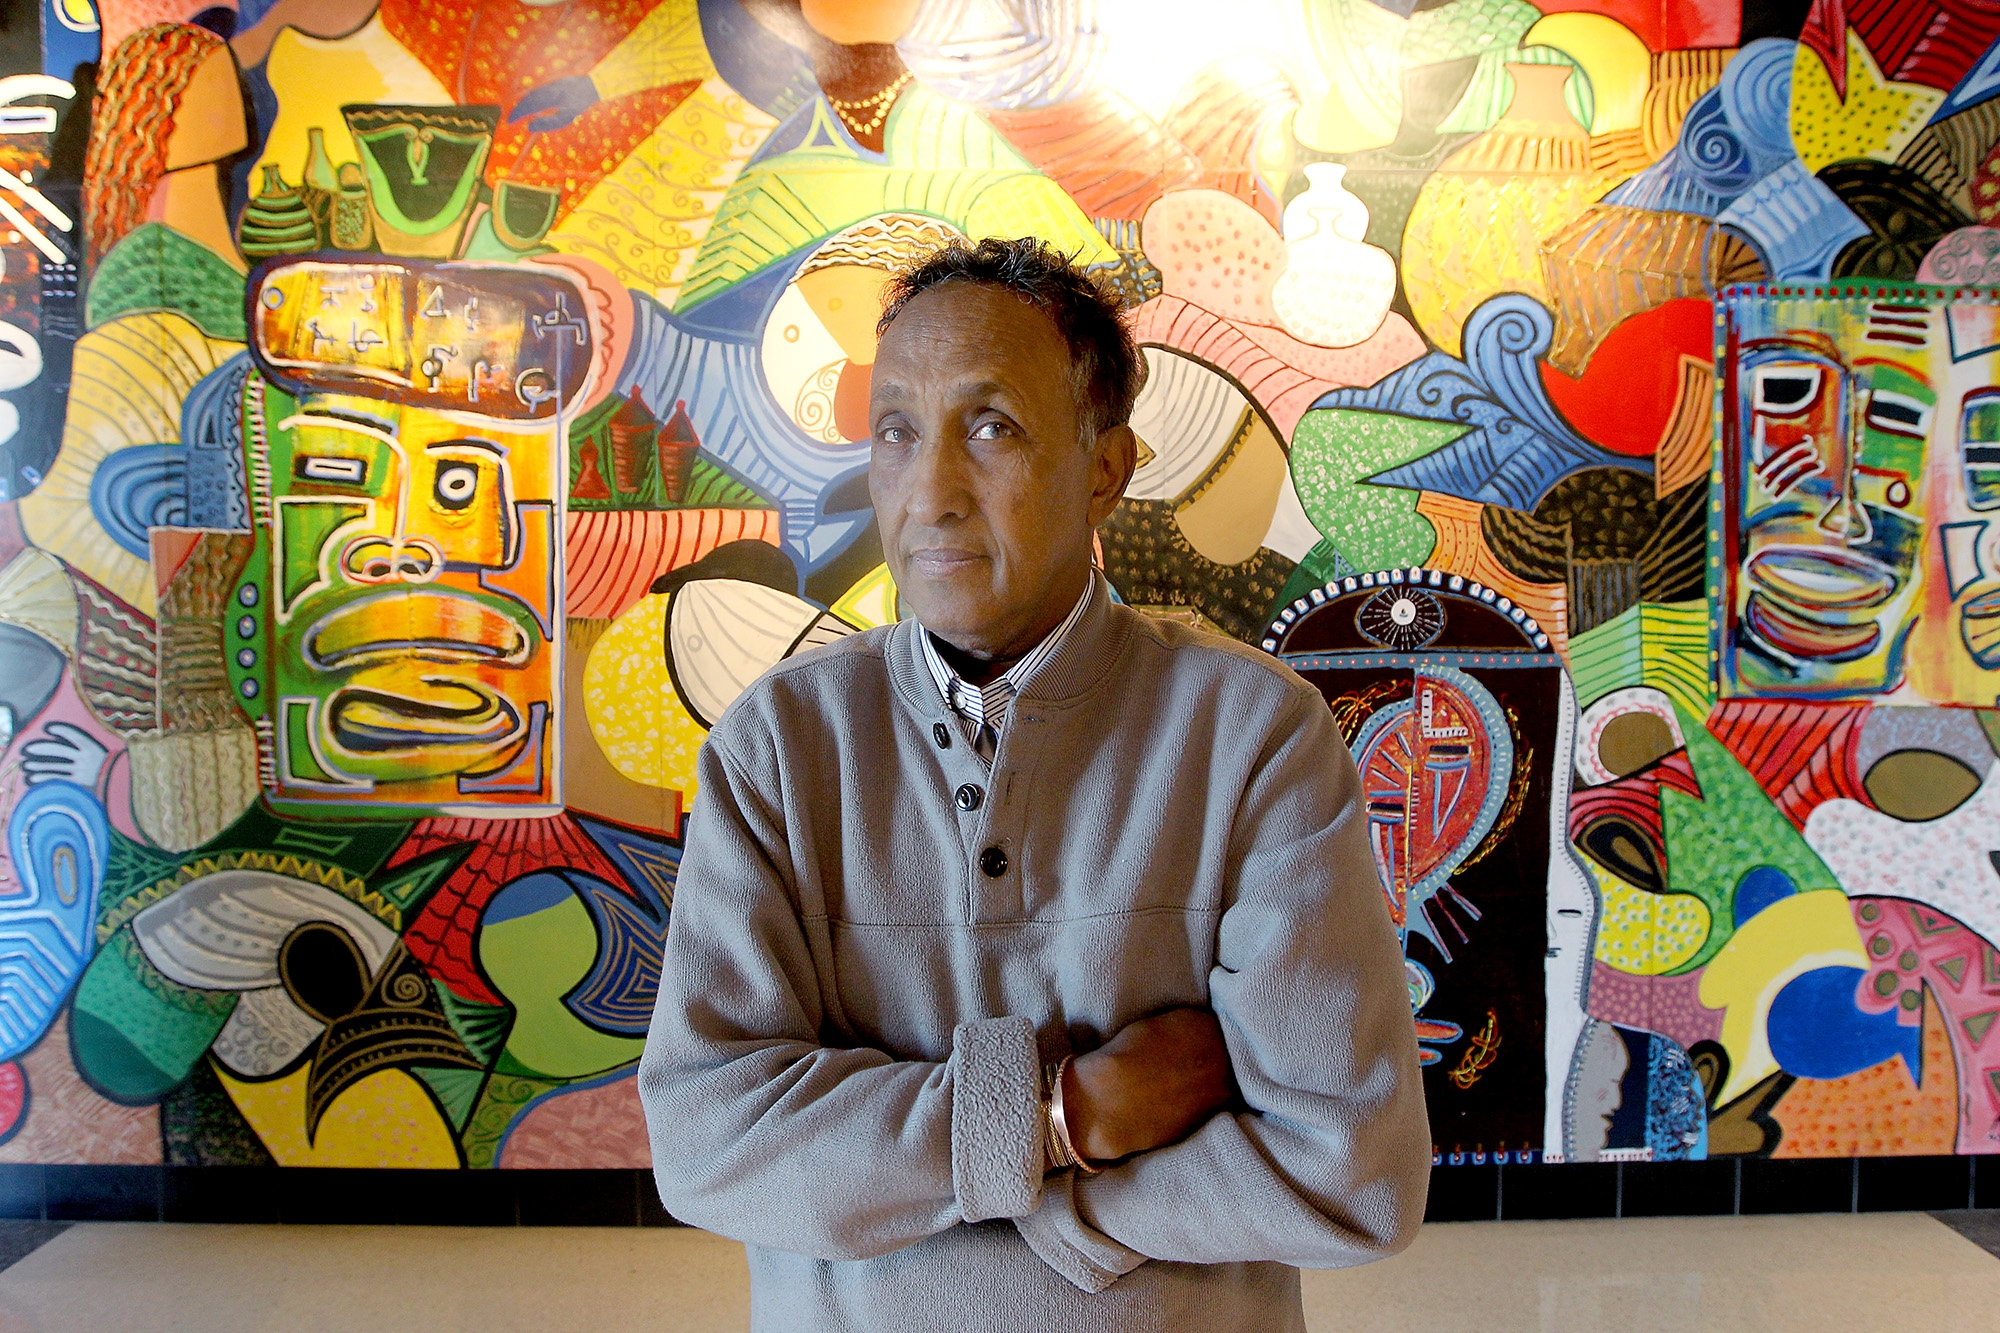 Abdulasis, also known as Aziz, stood in front of a wall-size mural at the Midtown Global Market.